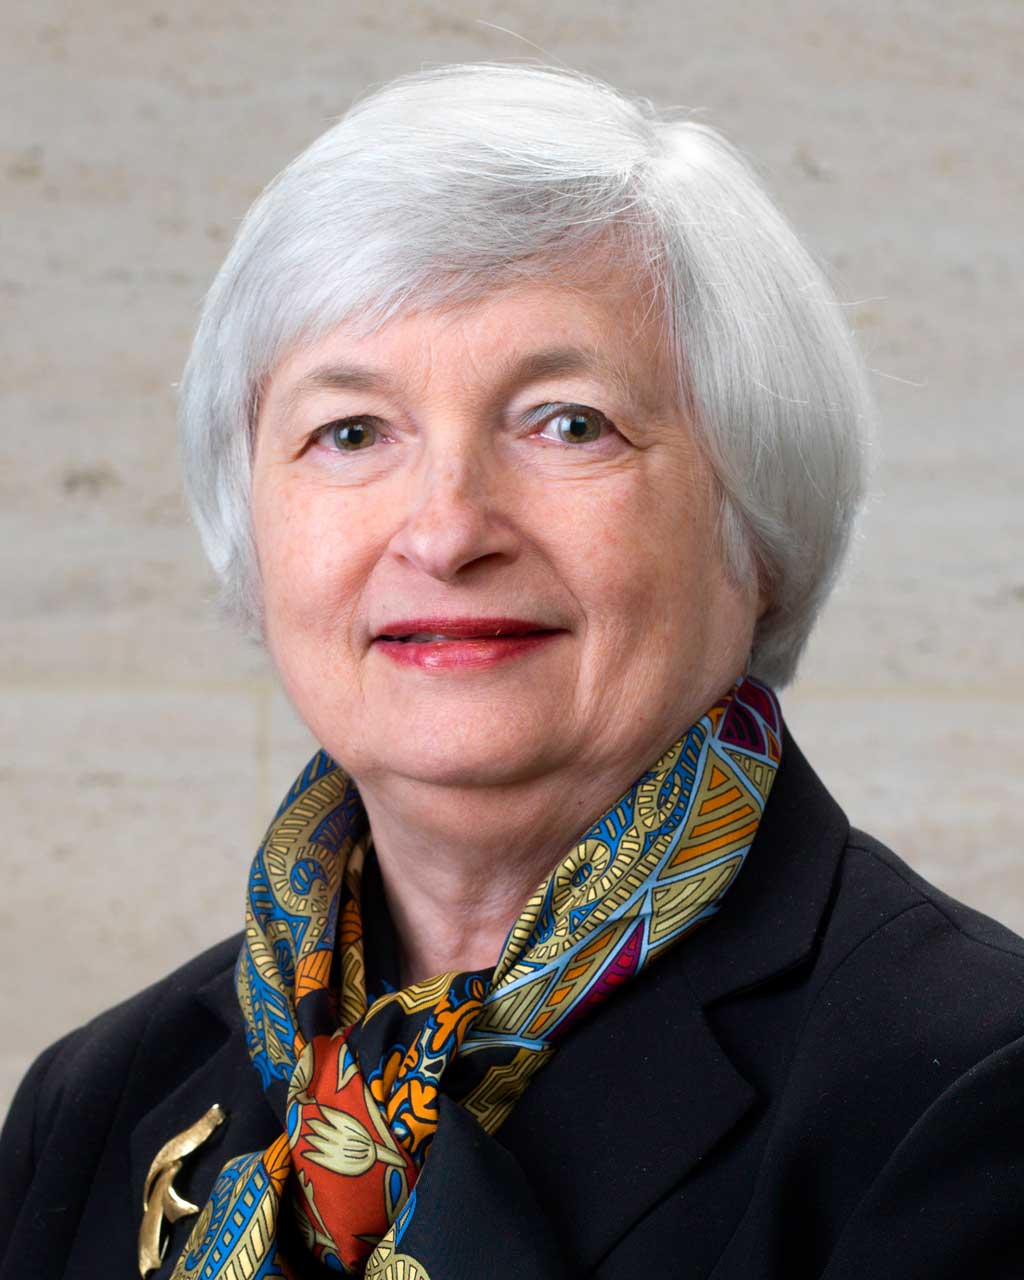 Chair of the Federal Reserve Board Janet L. Yellen is the first woman to hold the position of Chair of the Federal Reserve Board of Governors.